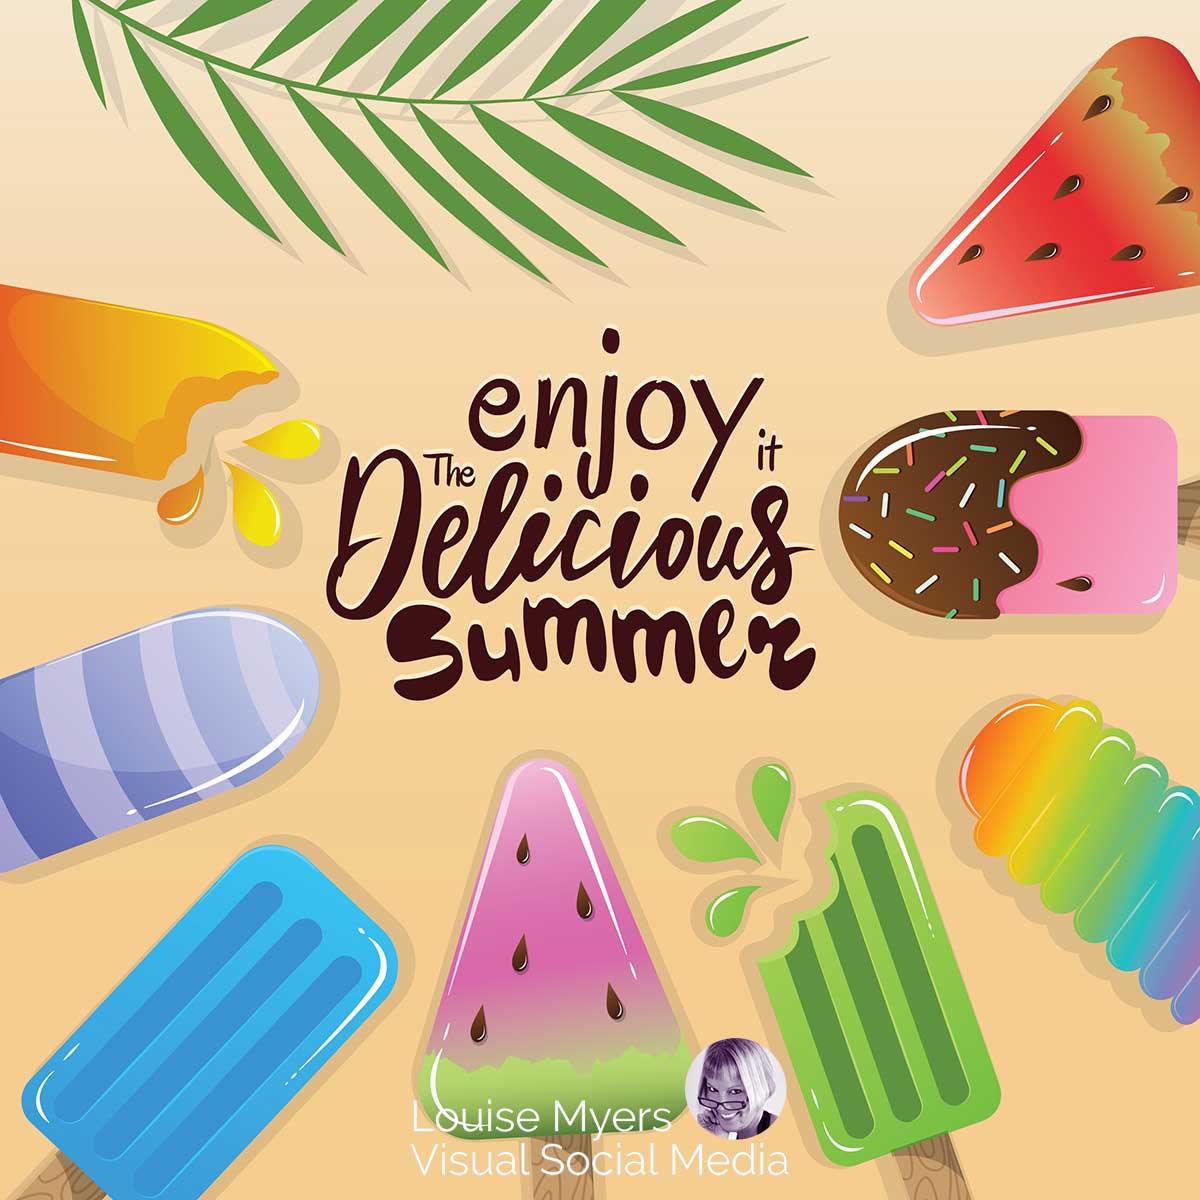 colorful popsicles art says enjoy the delicious summer.